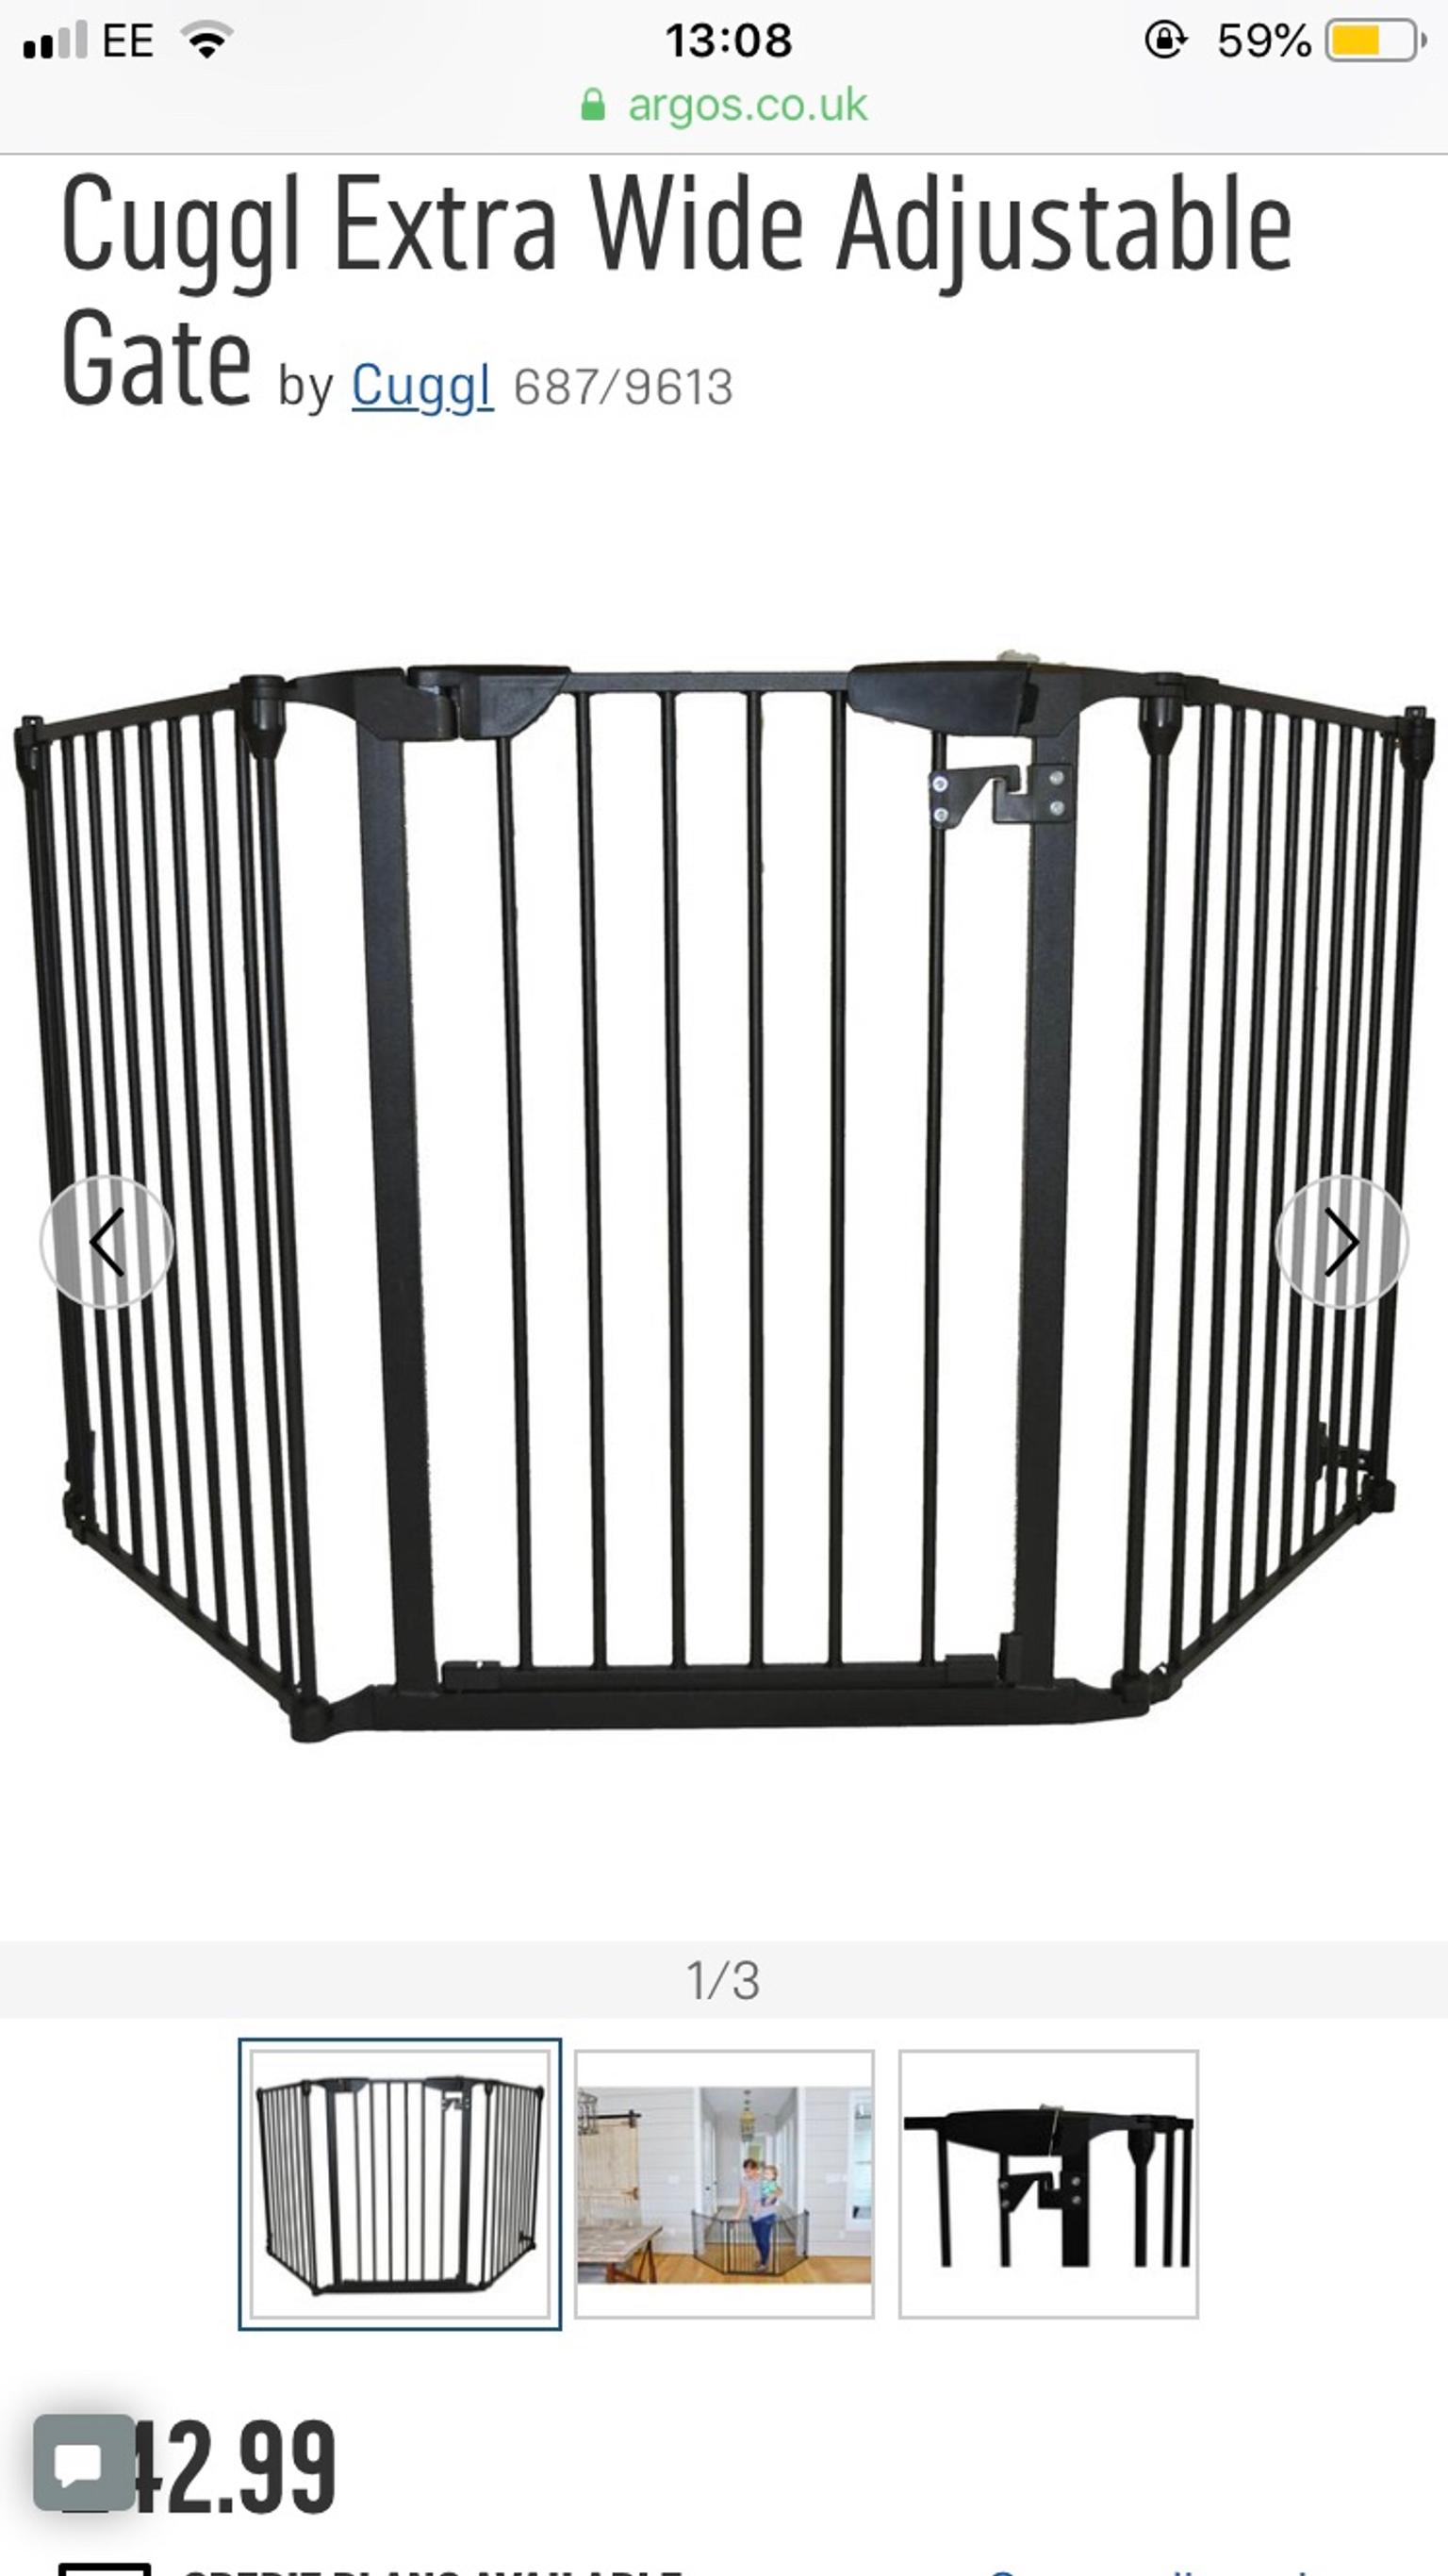 Cuggl Extra Wide Baby Gate in M4 